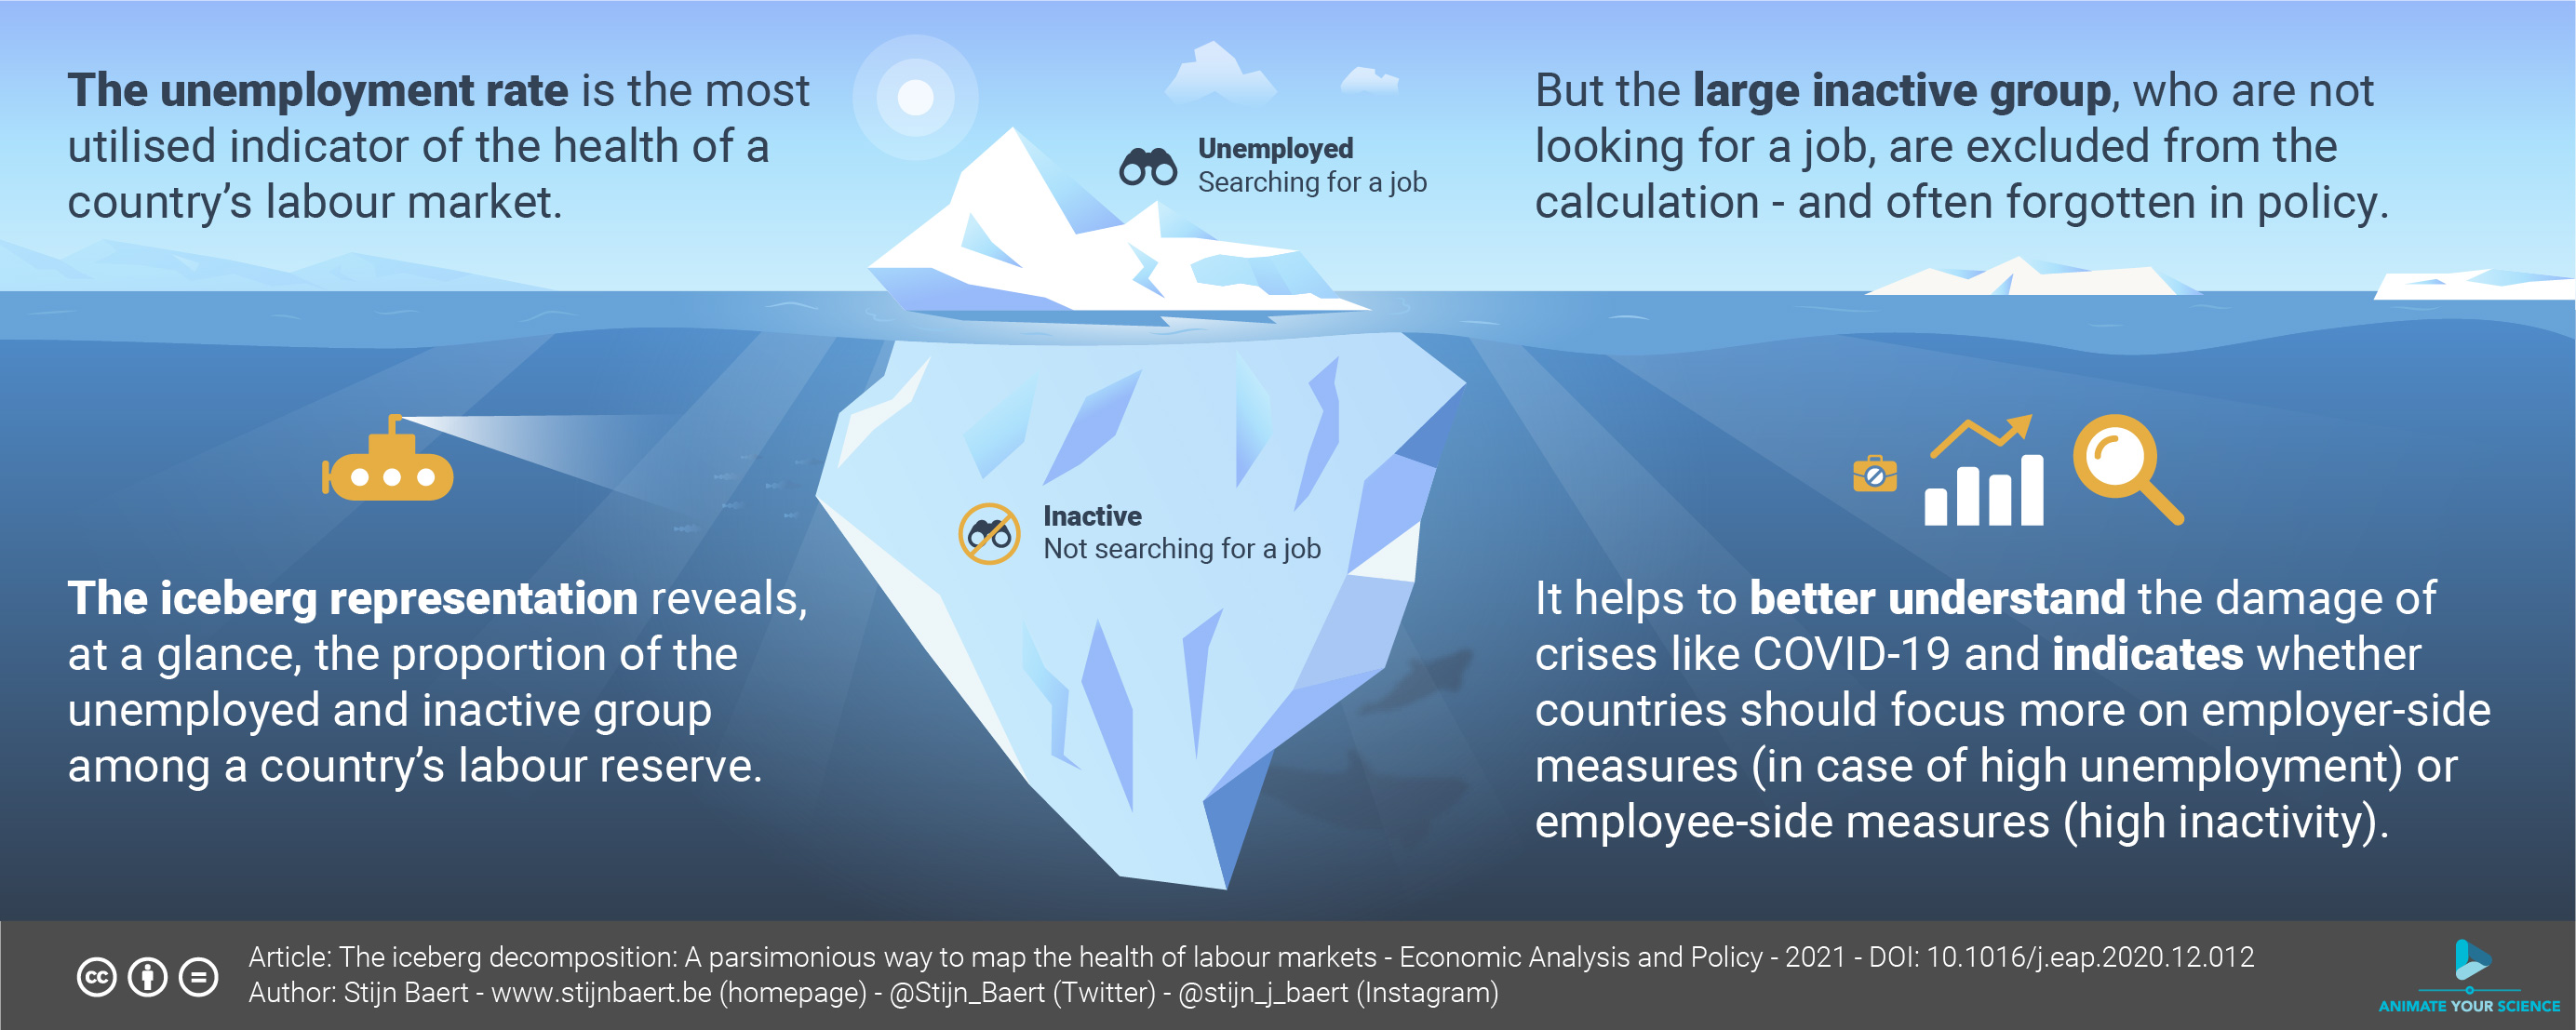 Stijn Baert, Economic Analysis and Policy, The Iceberg Decomposition: A Parsimonious Way to Map the Health of Labour Markets